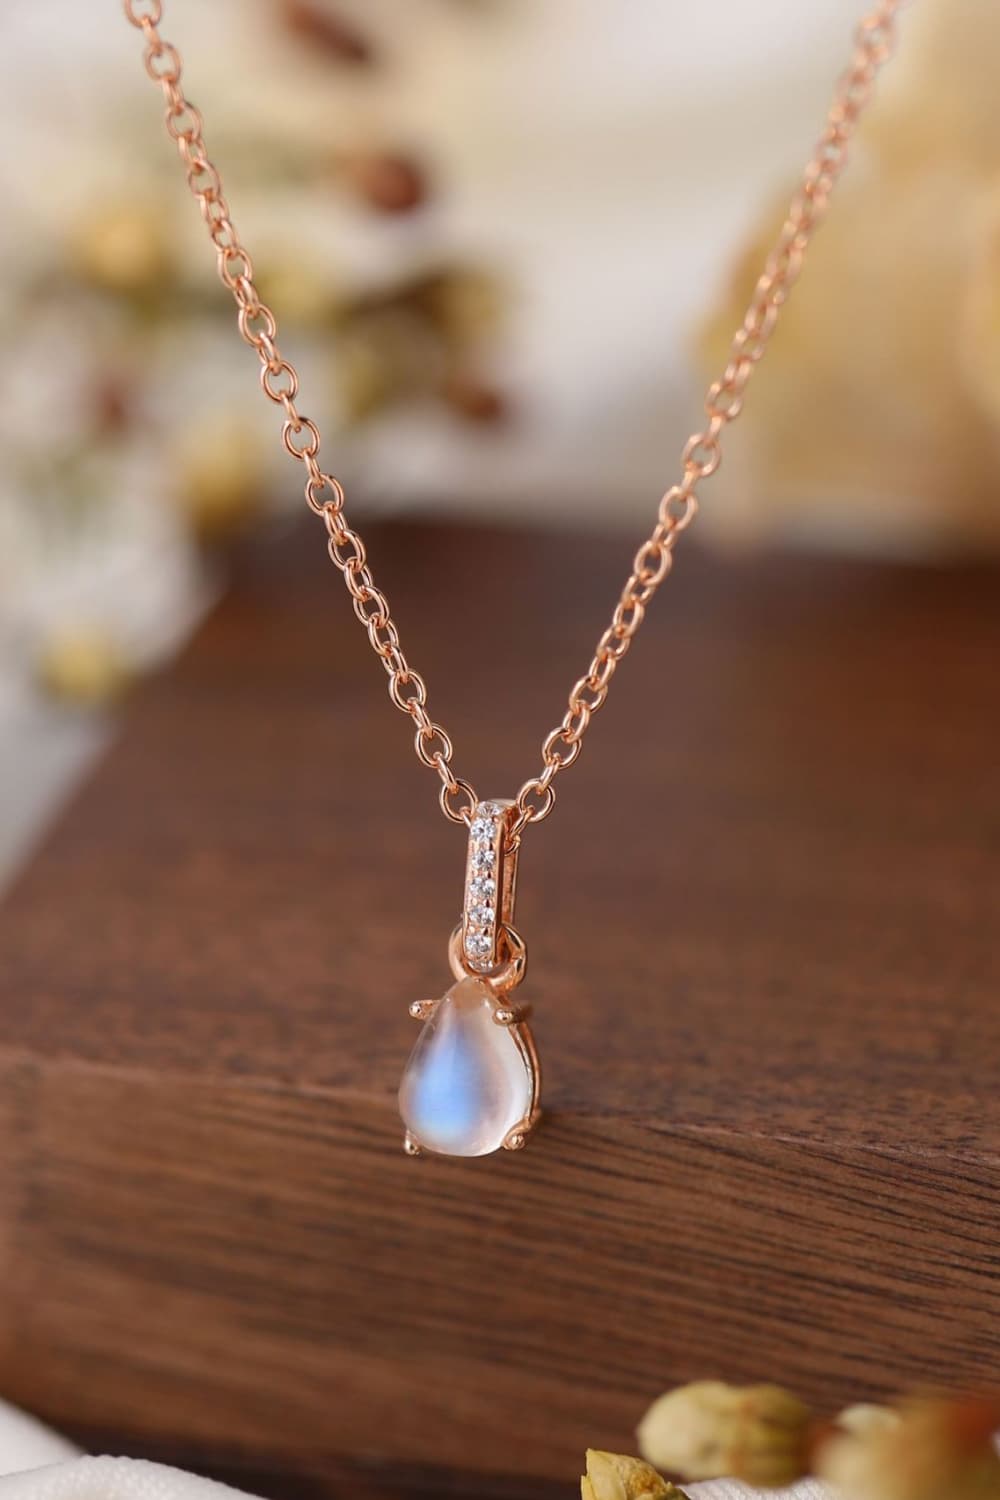 High Quality Natural Moonstone Teardrop Pendant 925 Sterling Silver Necklace BLUE ZONE PLANET